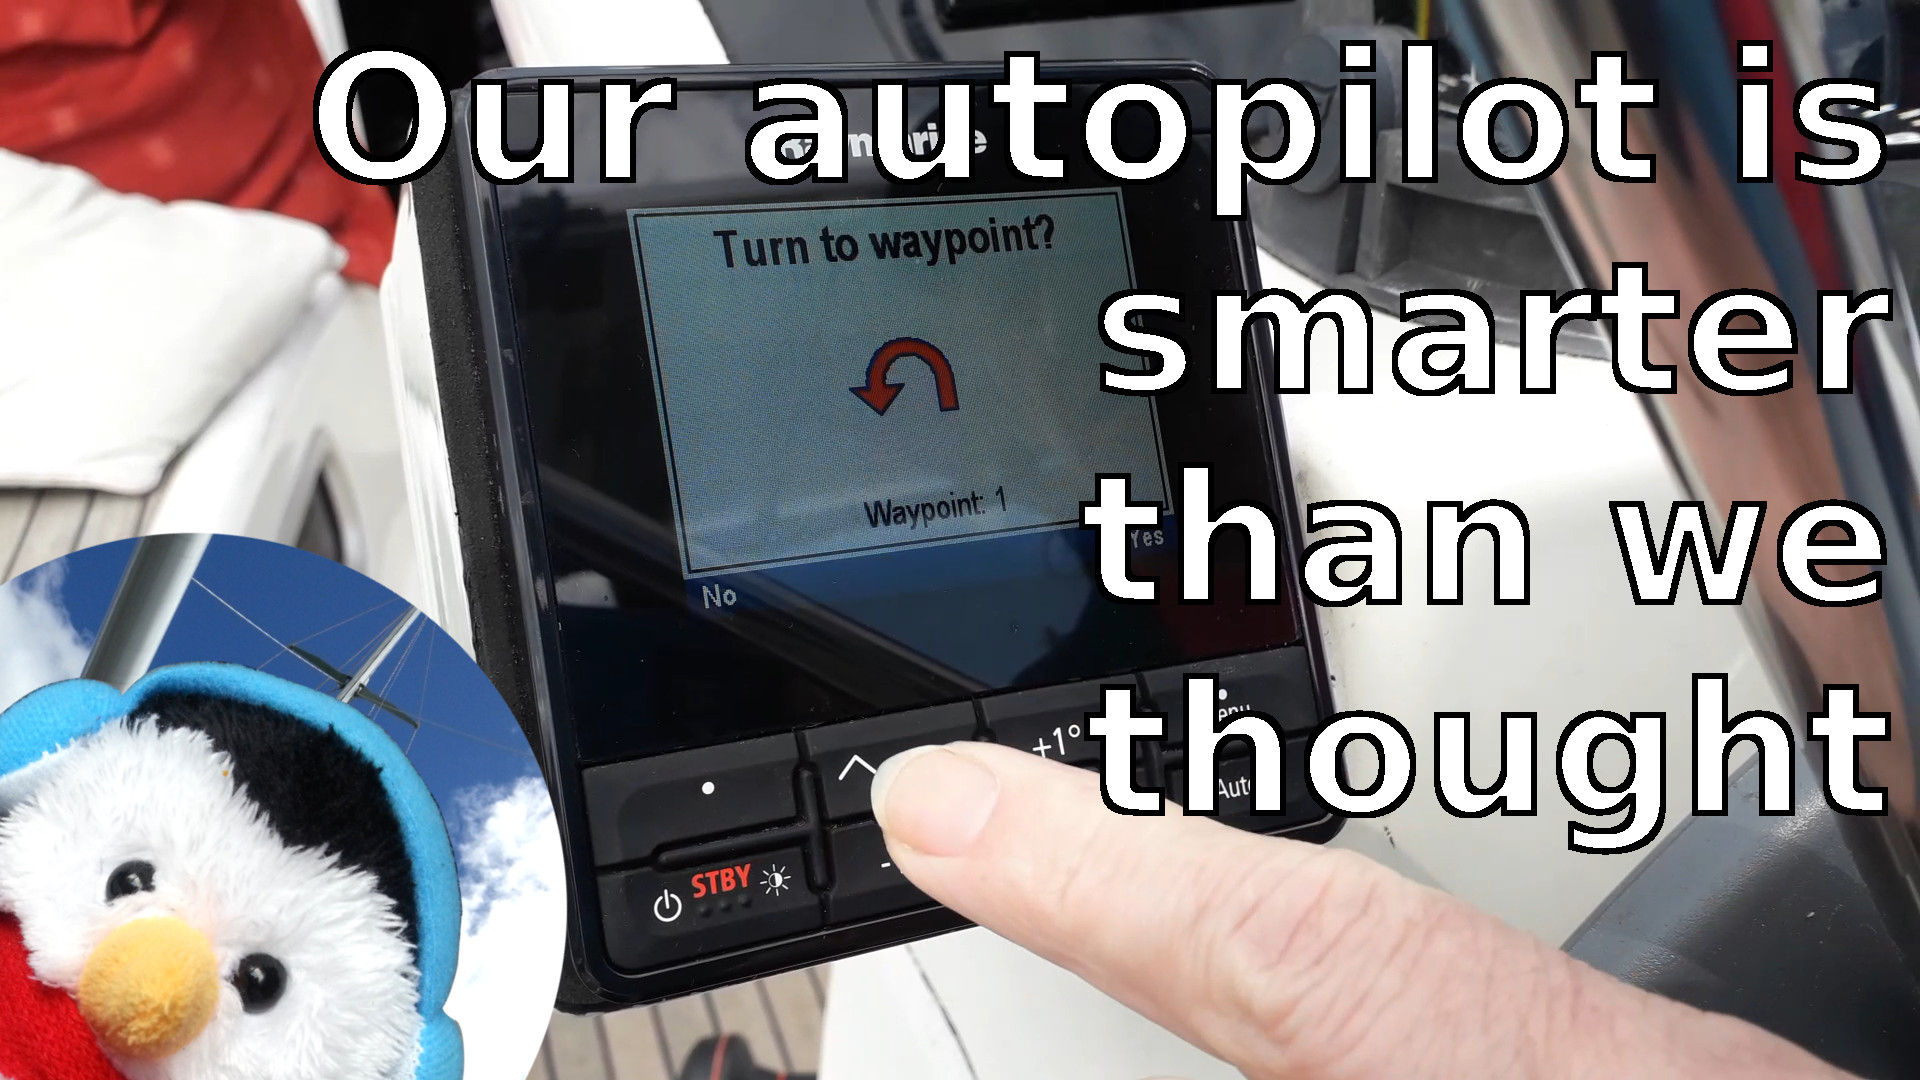 Watch our "Autopilot is cleverer than we thought" video and add comments etc.